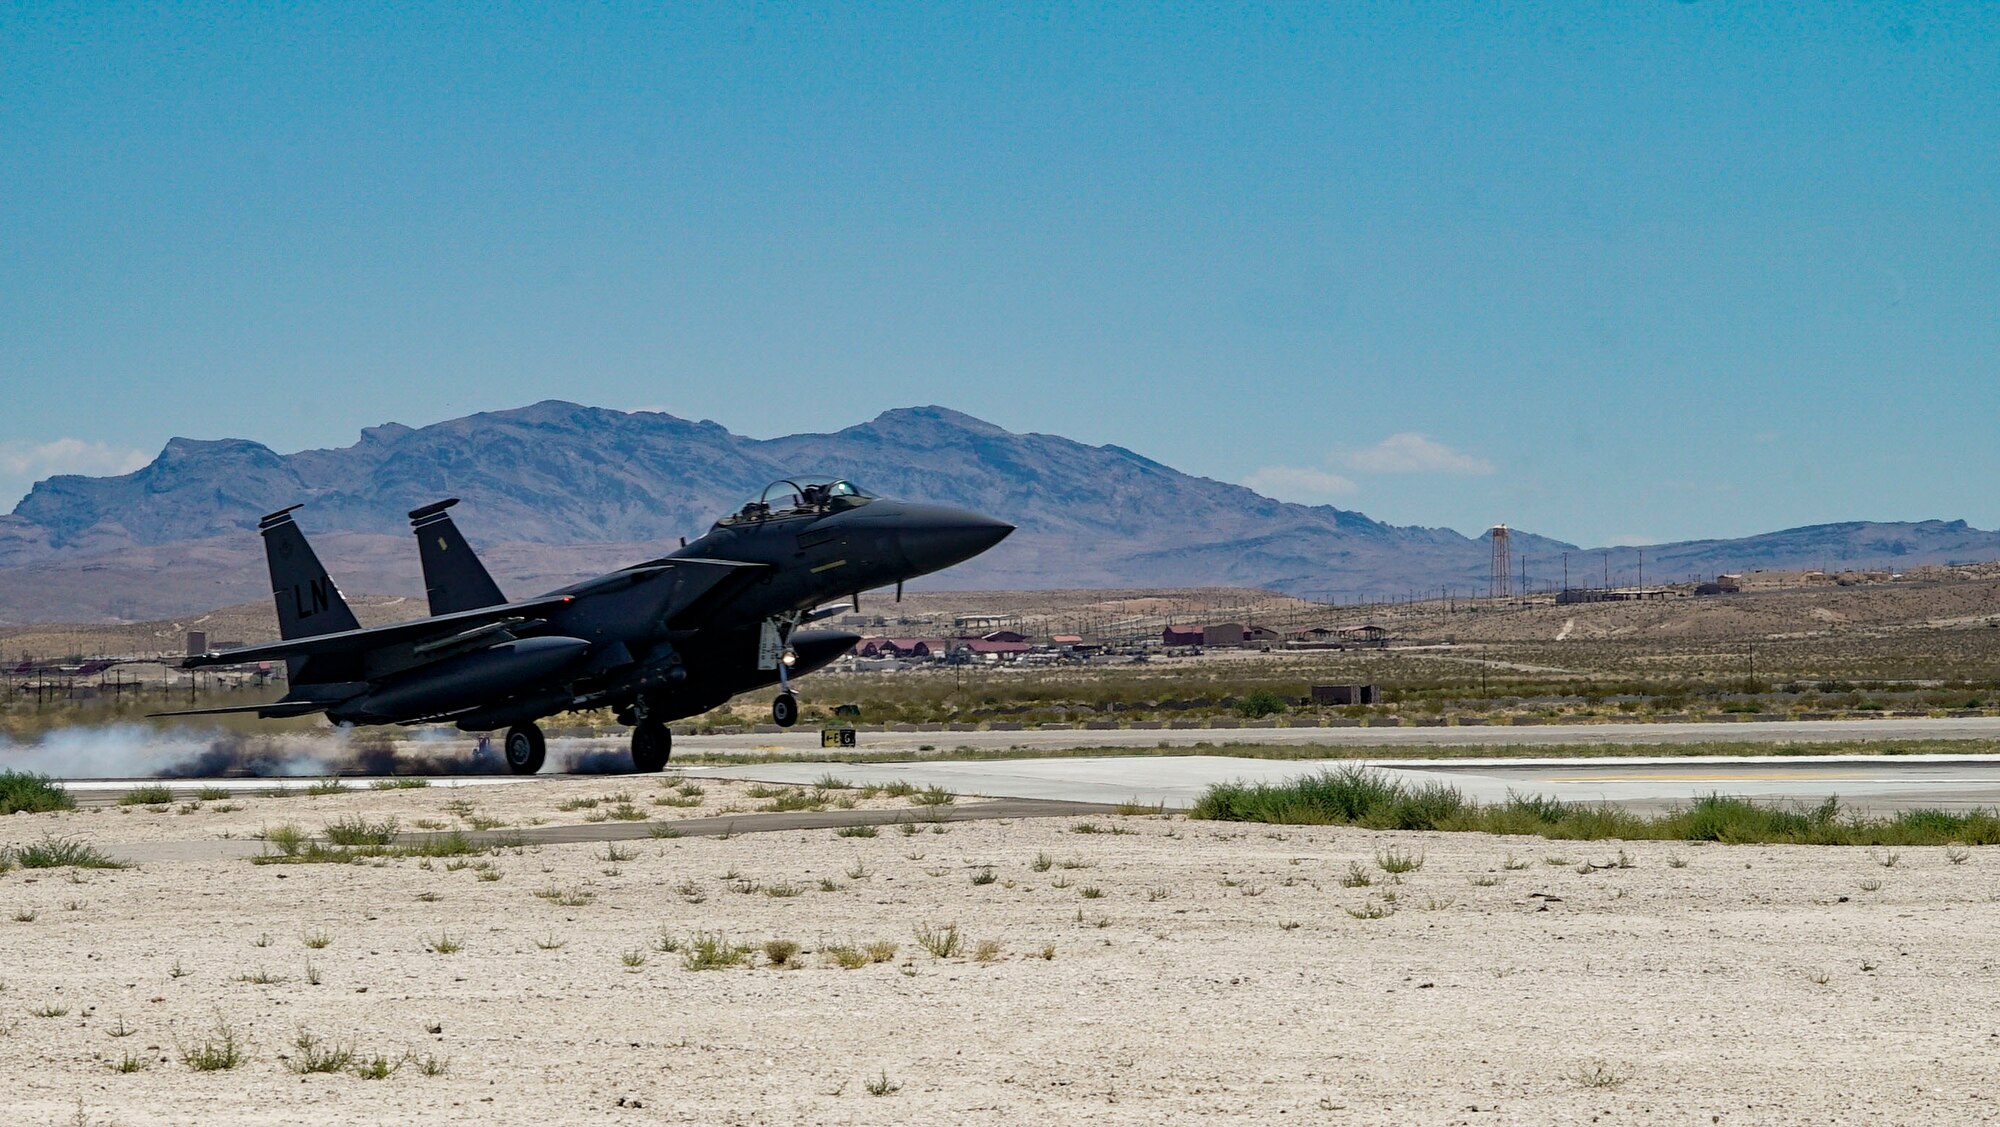 An F-15E Strike Eagle assigned to the 48th Fighter Wing at RAF Lakenheath lands at Nellis Air Force Base for Red Flag 19-3. Red Flag provides aircrews the experience of multiple, intensive air combat sorties in the safety of a training environment. (U.S. Air Force photo by Senior Airman Julian W. Kemper)